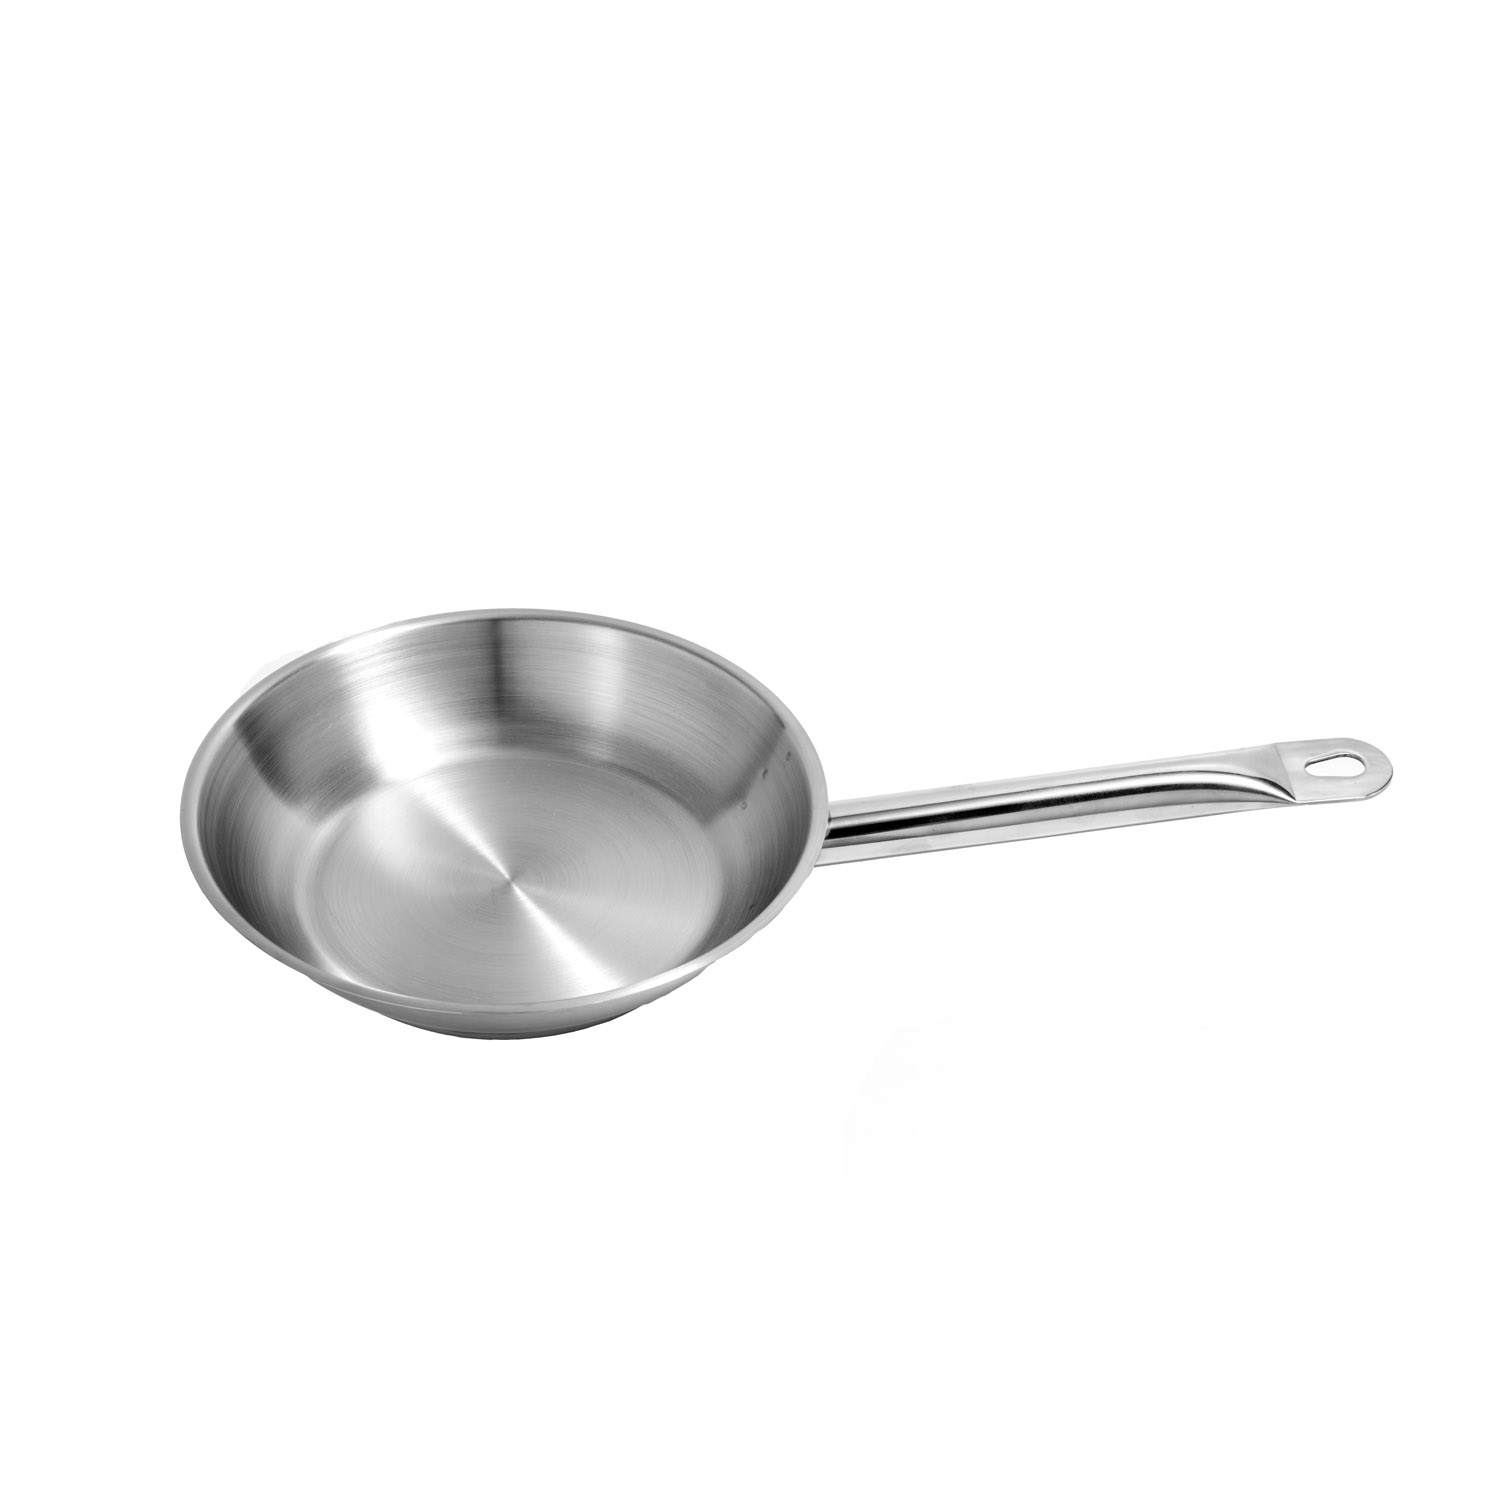 CAC China S1FP-9 Stainless Steel Fry Pan 9-1/2"